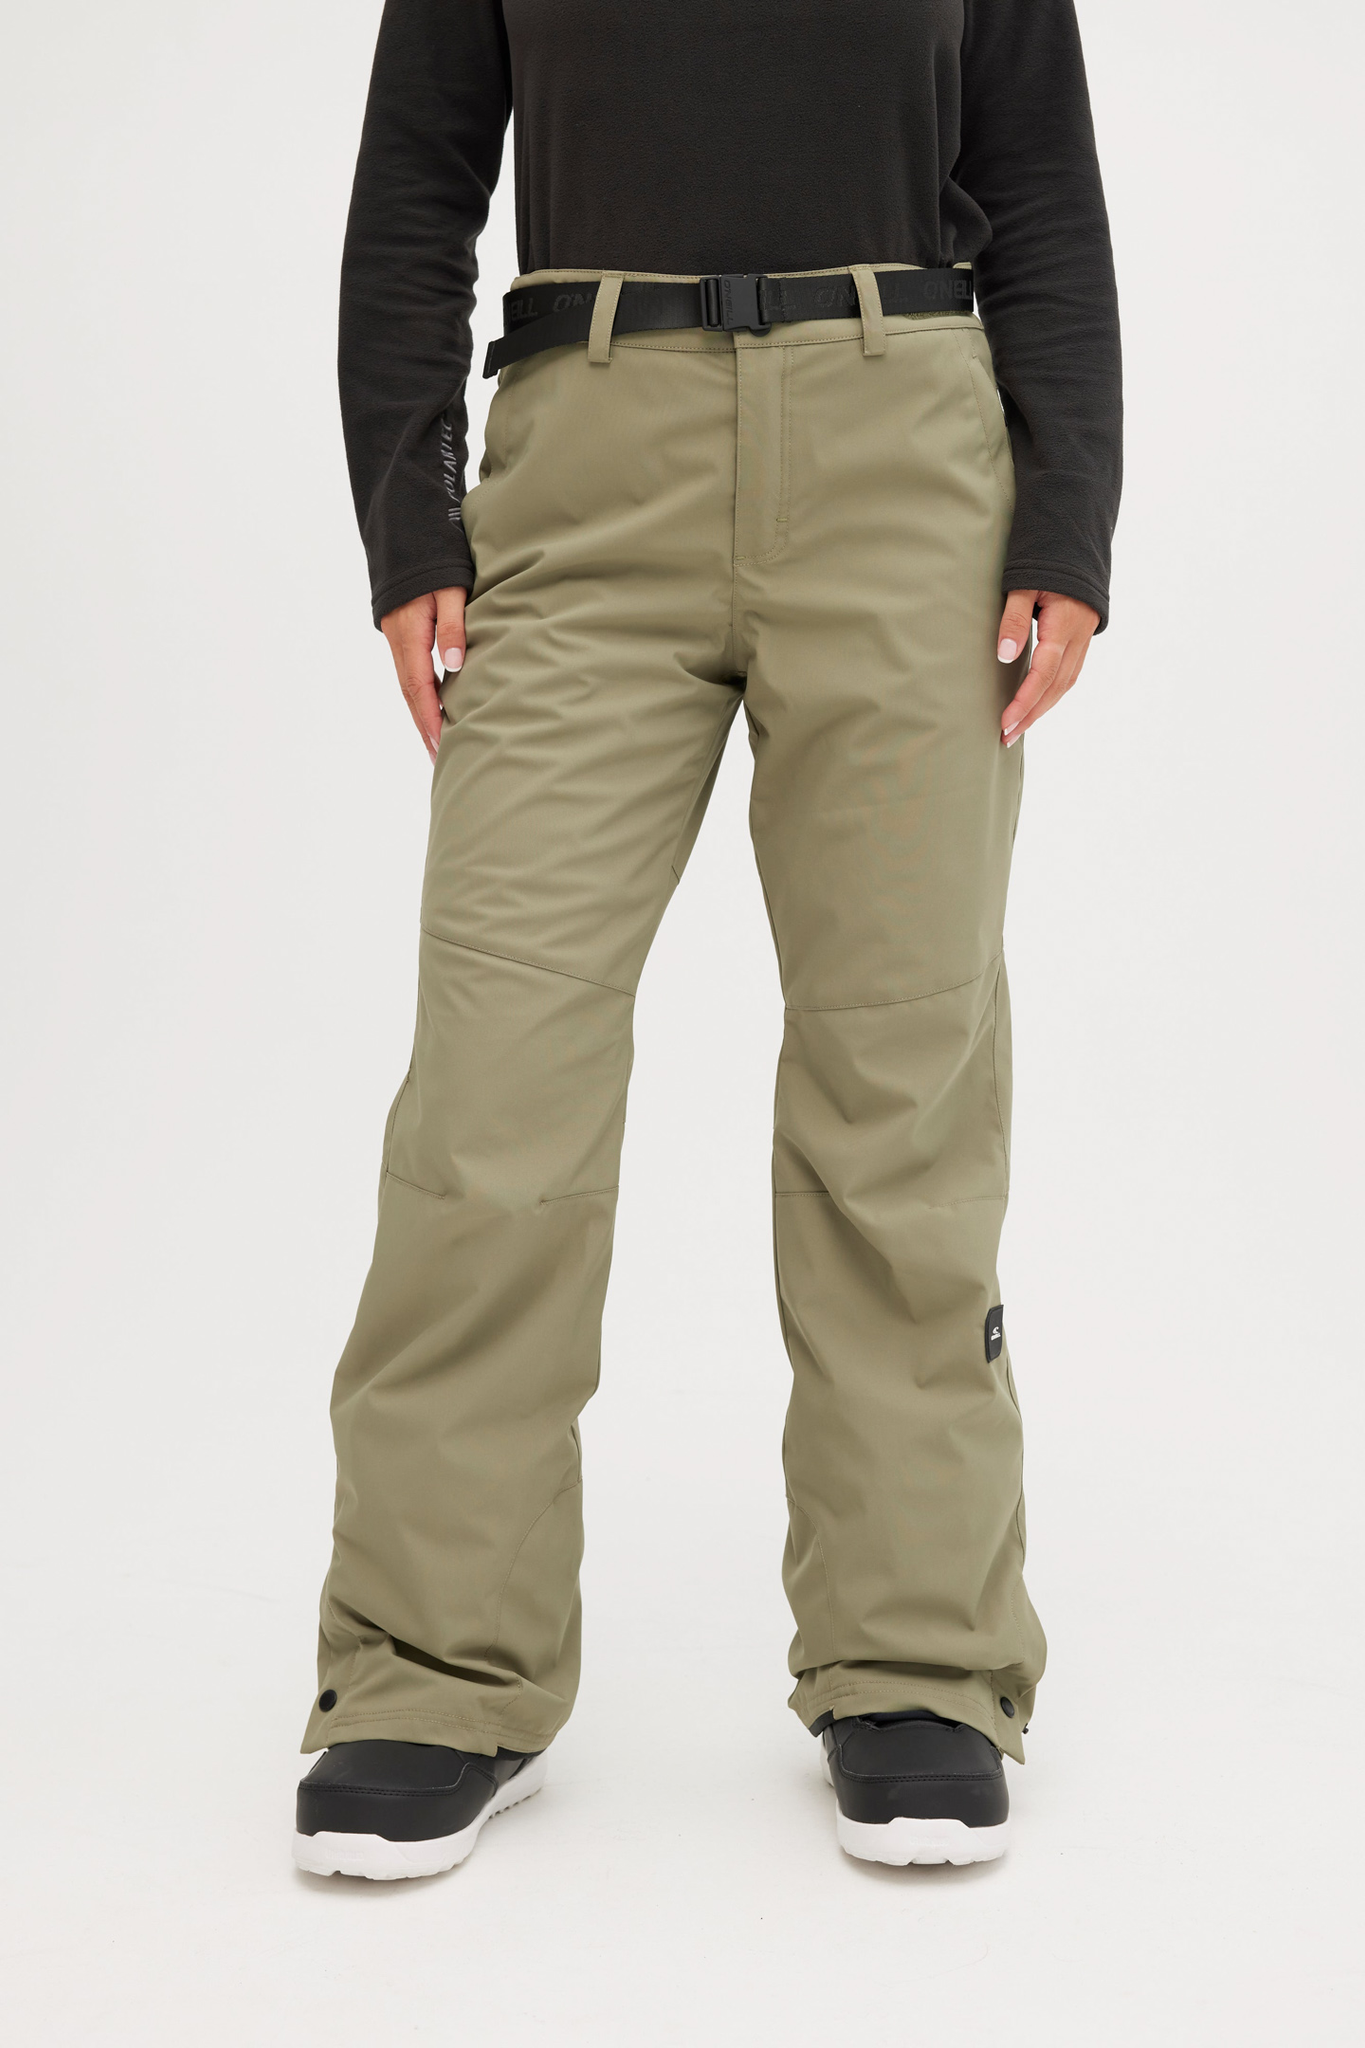 Oneill Star Slim Snow Pants Womens in Conch Shell - TRIGGER BROS.  SURFBOARDS PTY. LTD.